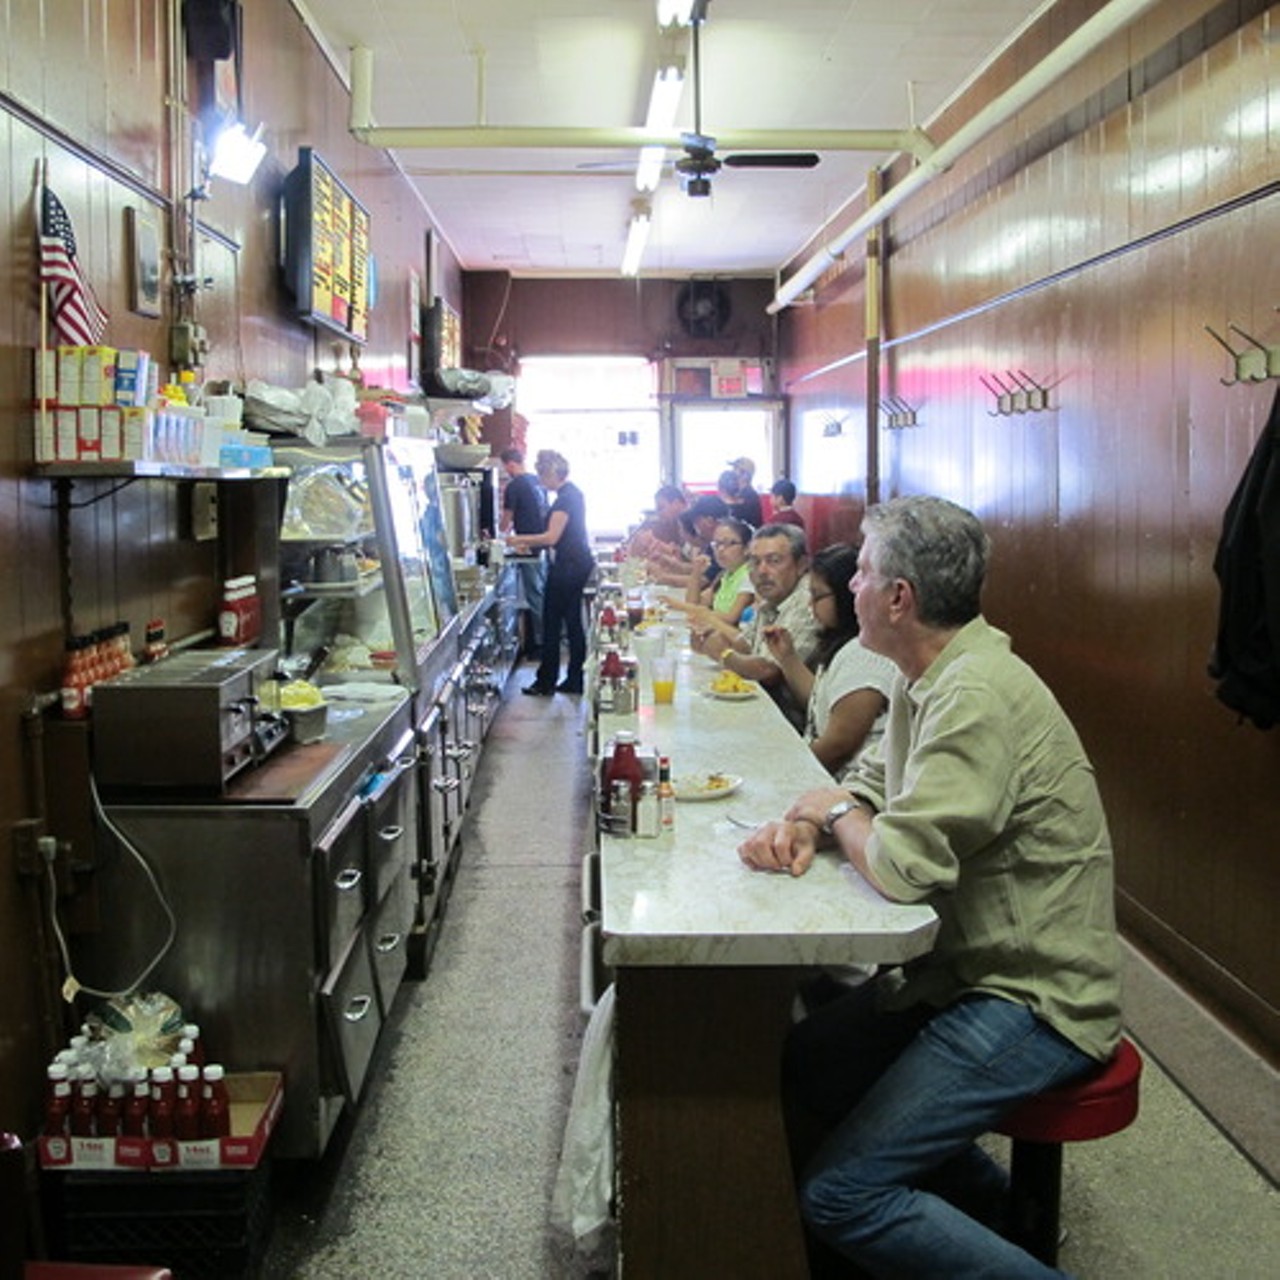  Anthony Bourdain ate his favorite Coney dog at Duly&#146;s  
Bourdain had the first coney he ever enjoyed at Duly's Place Coney Island in Southwest while filming an episode of &#147;Parts Unknown.&#148; After his experience at the 97-year-old diner, he called the "delicate interplay" between the ingredients of the hot dog, chili, bun, and raw onions "symphonic.&#148; 
Photo via  Tumblr